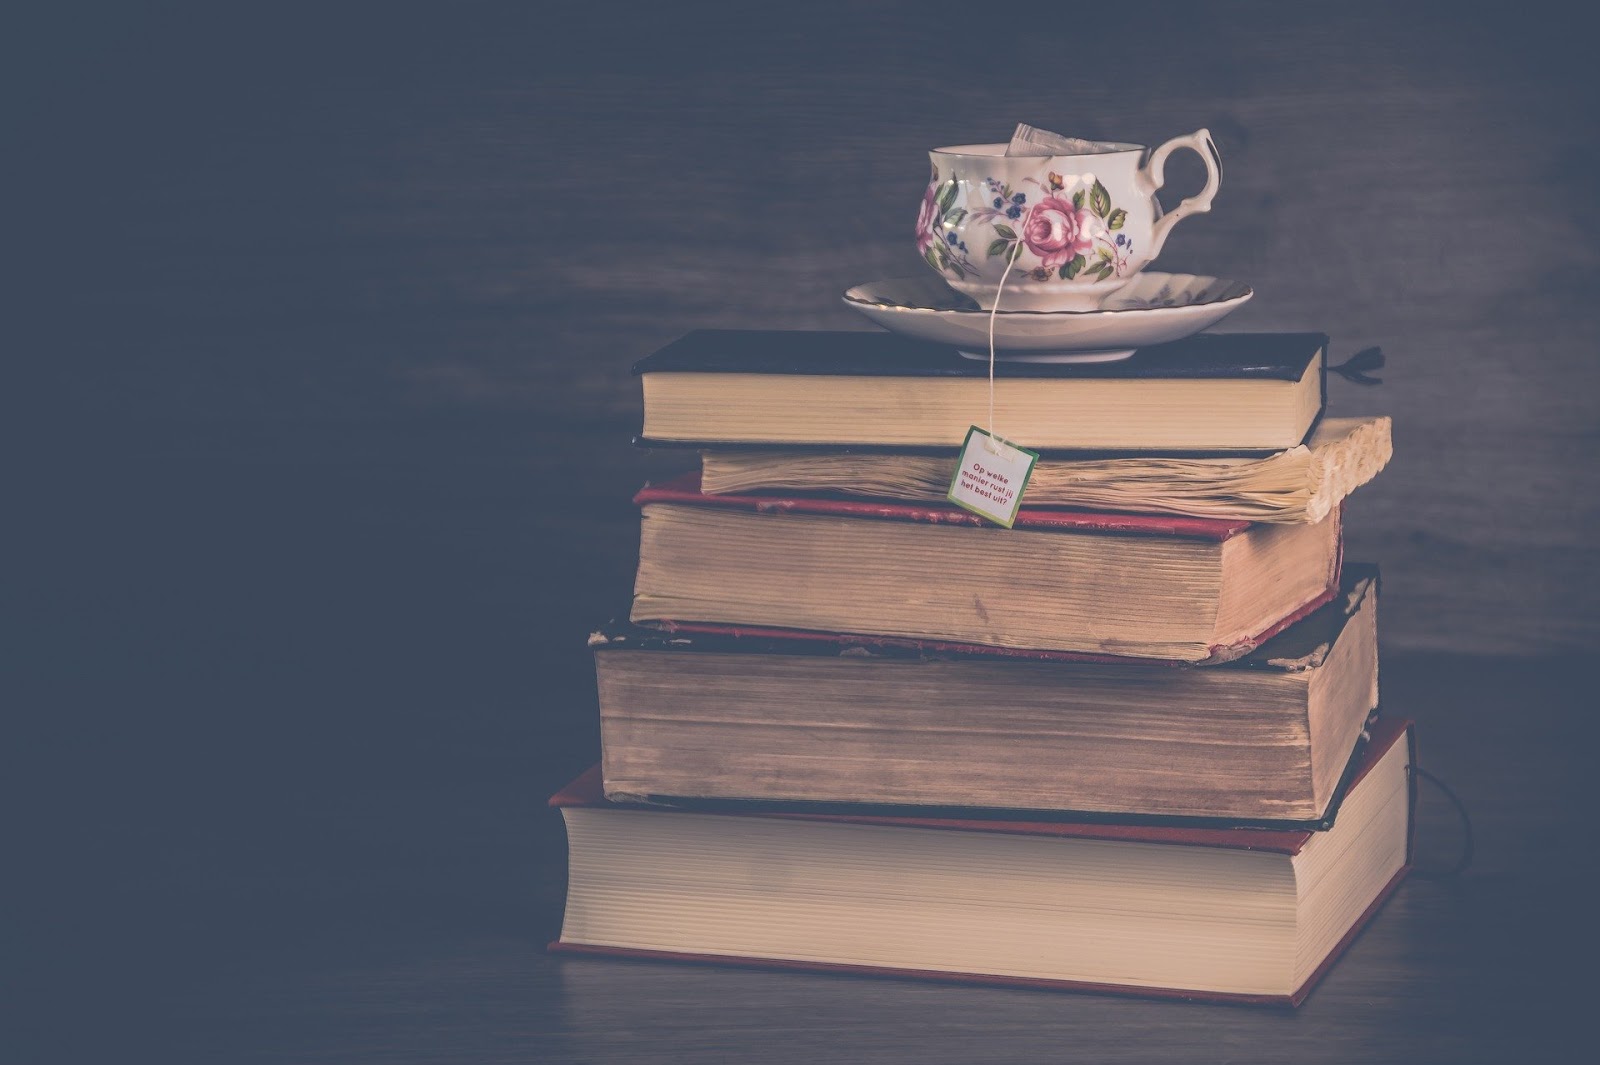 Stack of books on table with a tea cup on top